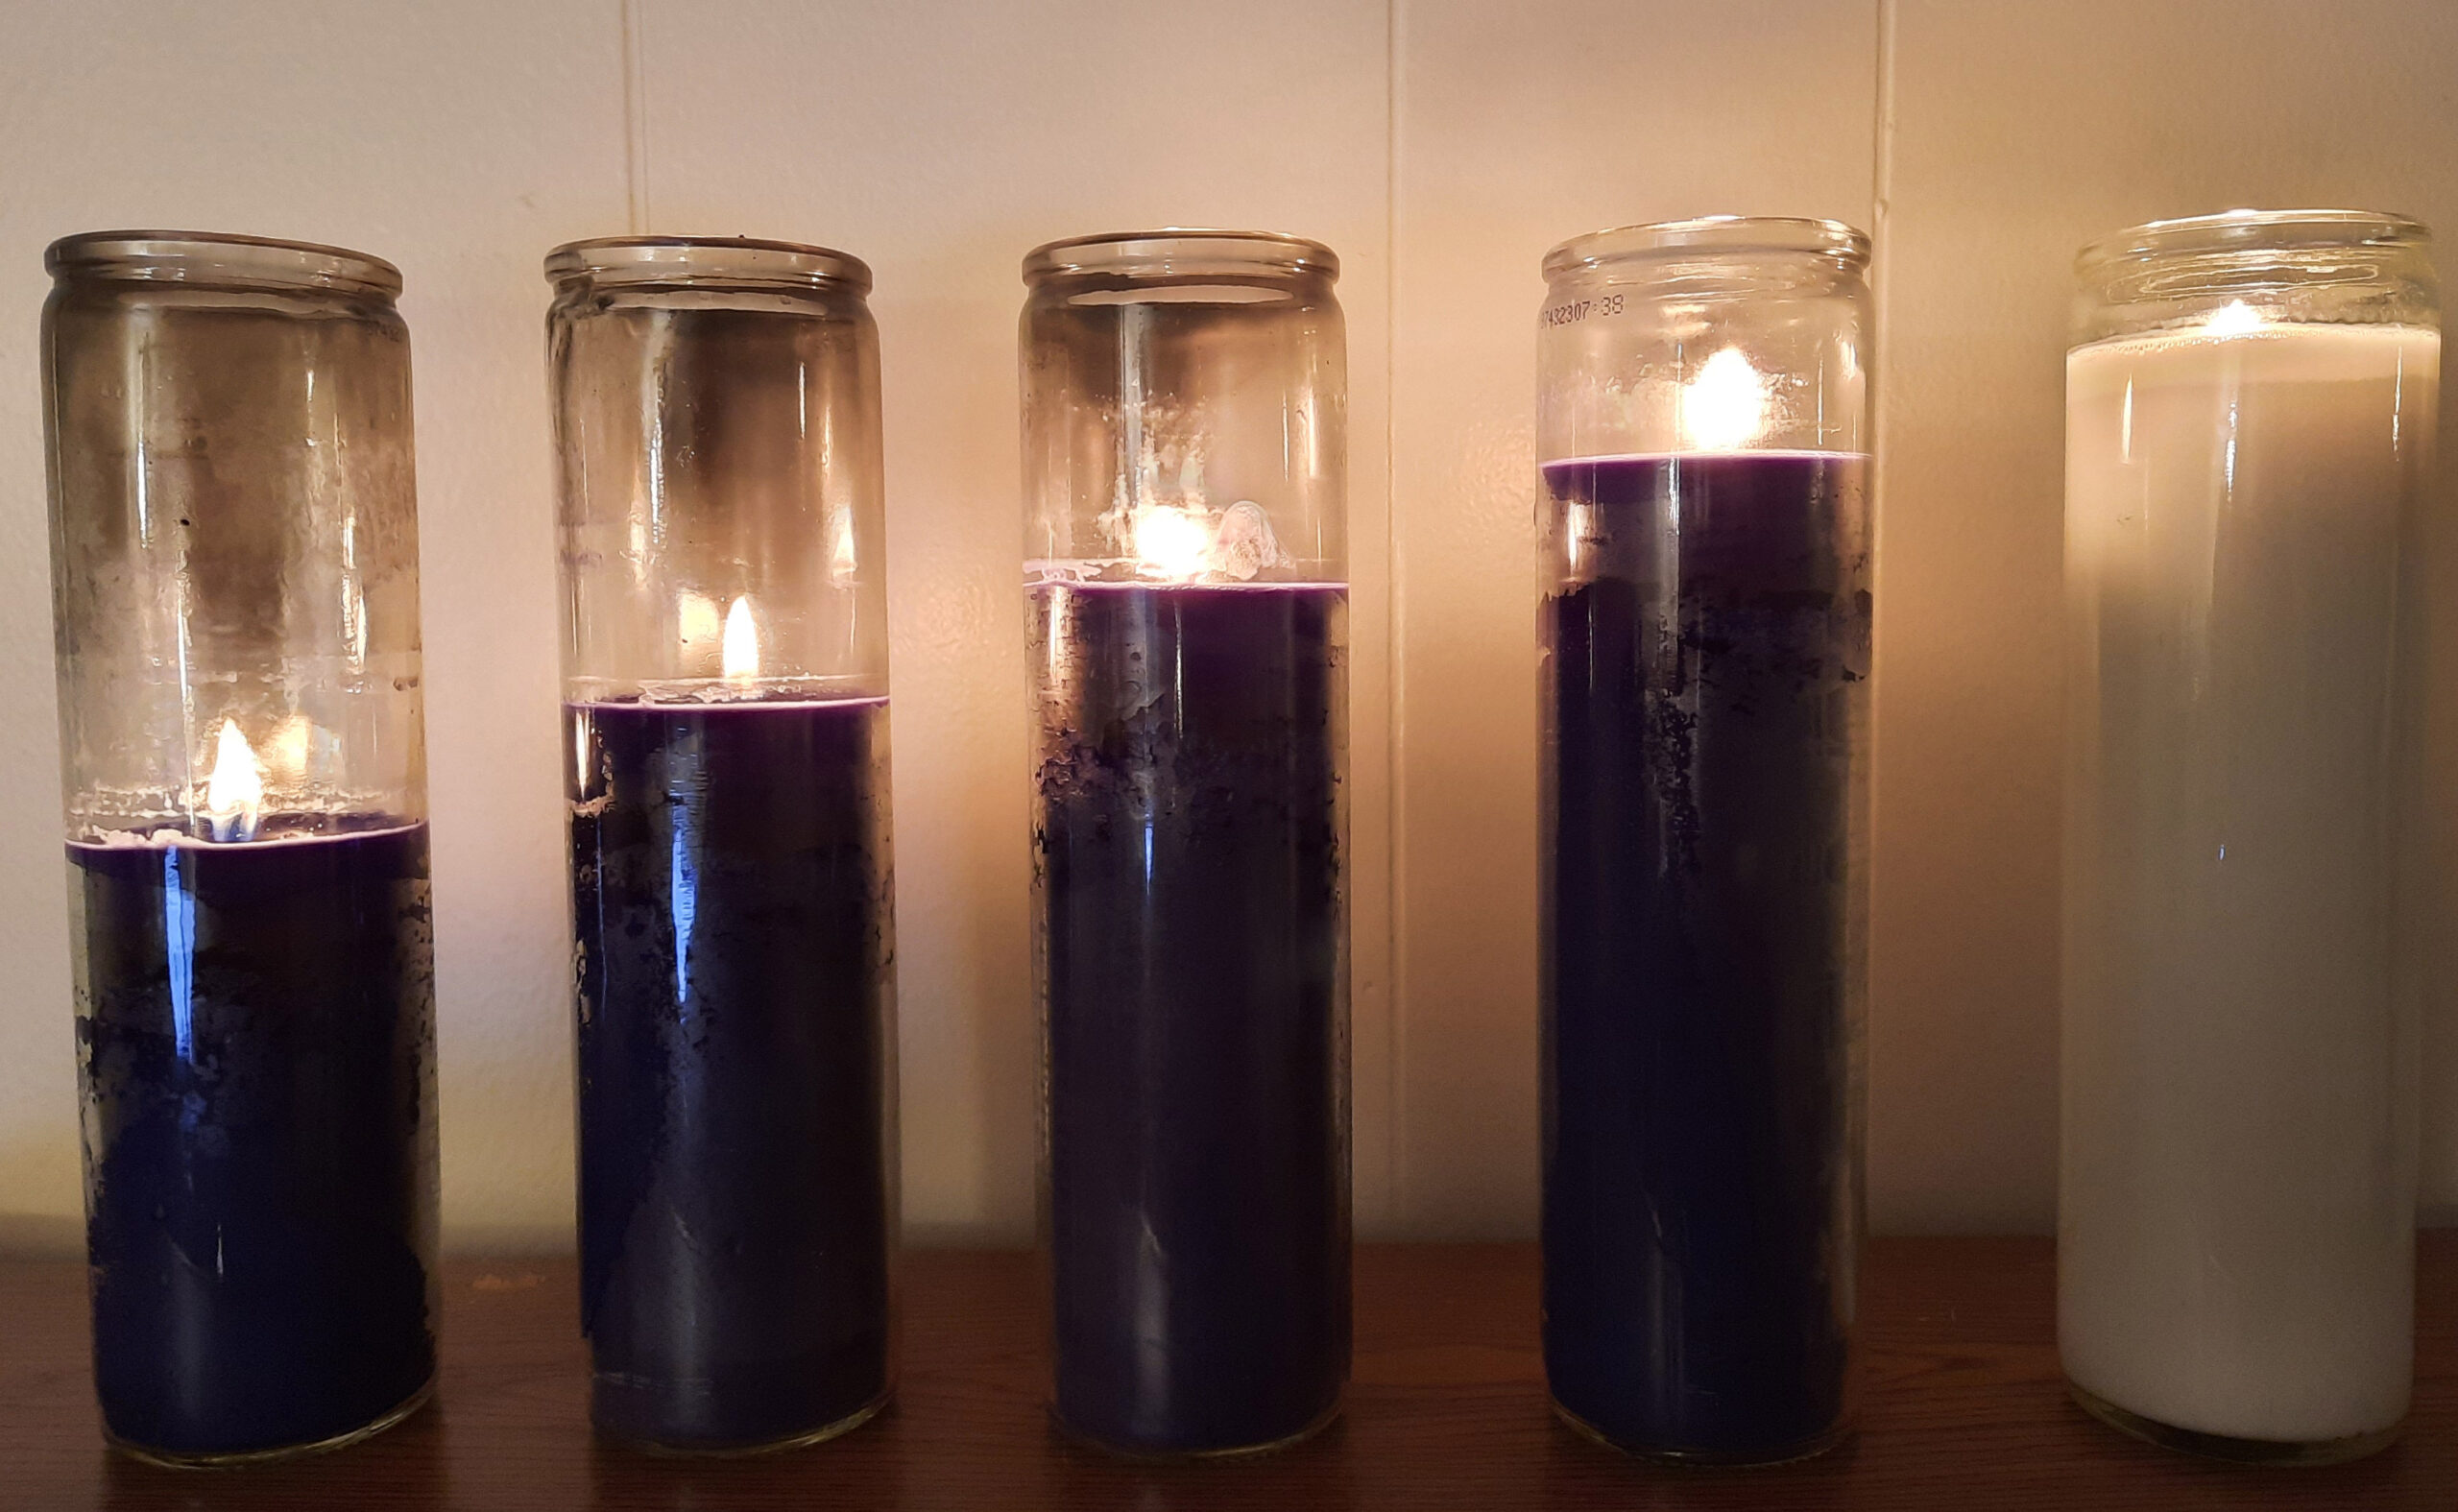 Five lit Advent candles: Four purple and one white.